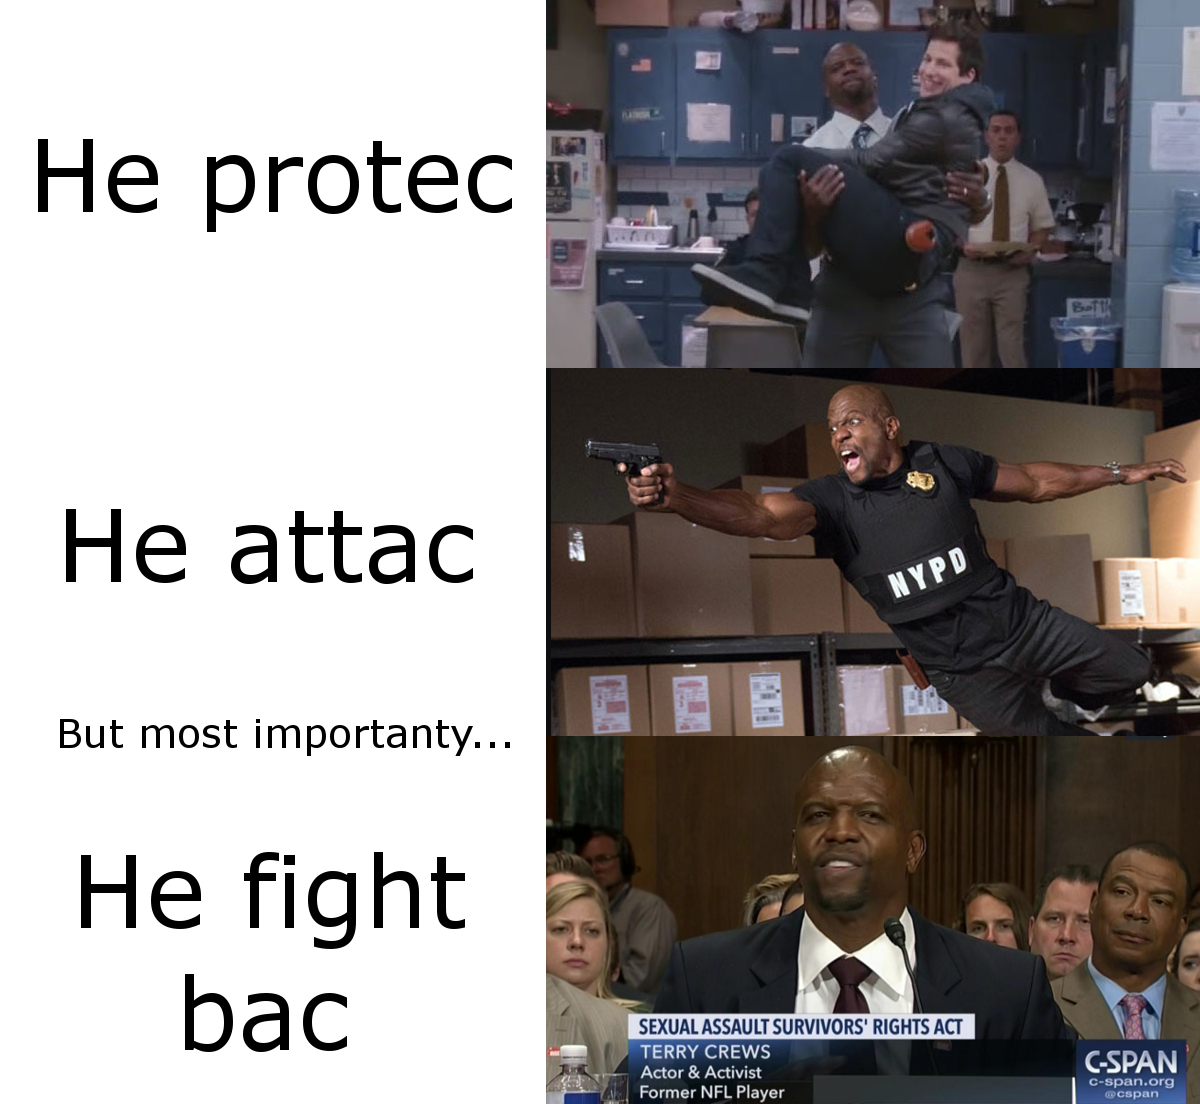 terry crews memes - He protec He attac Nypd But most importanty... He fight bac Sexual Assault Survivors Rights Act Terry Crews Actor & Activist Former Nfl Player CSpan